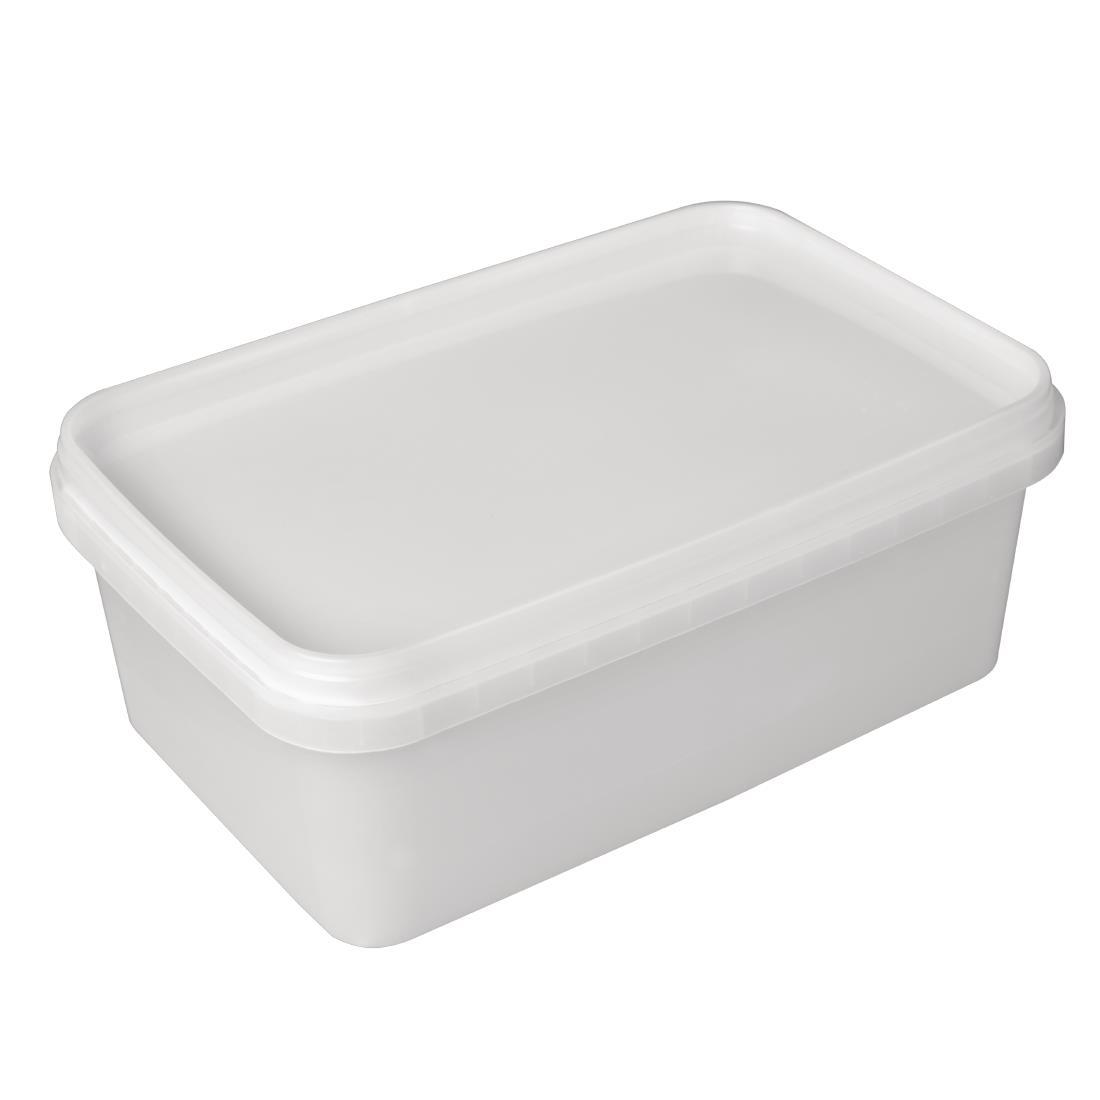 Ice Cream Containers 1.2Ltr (Pack of 44) - DA570  - 4